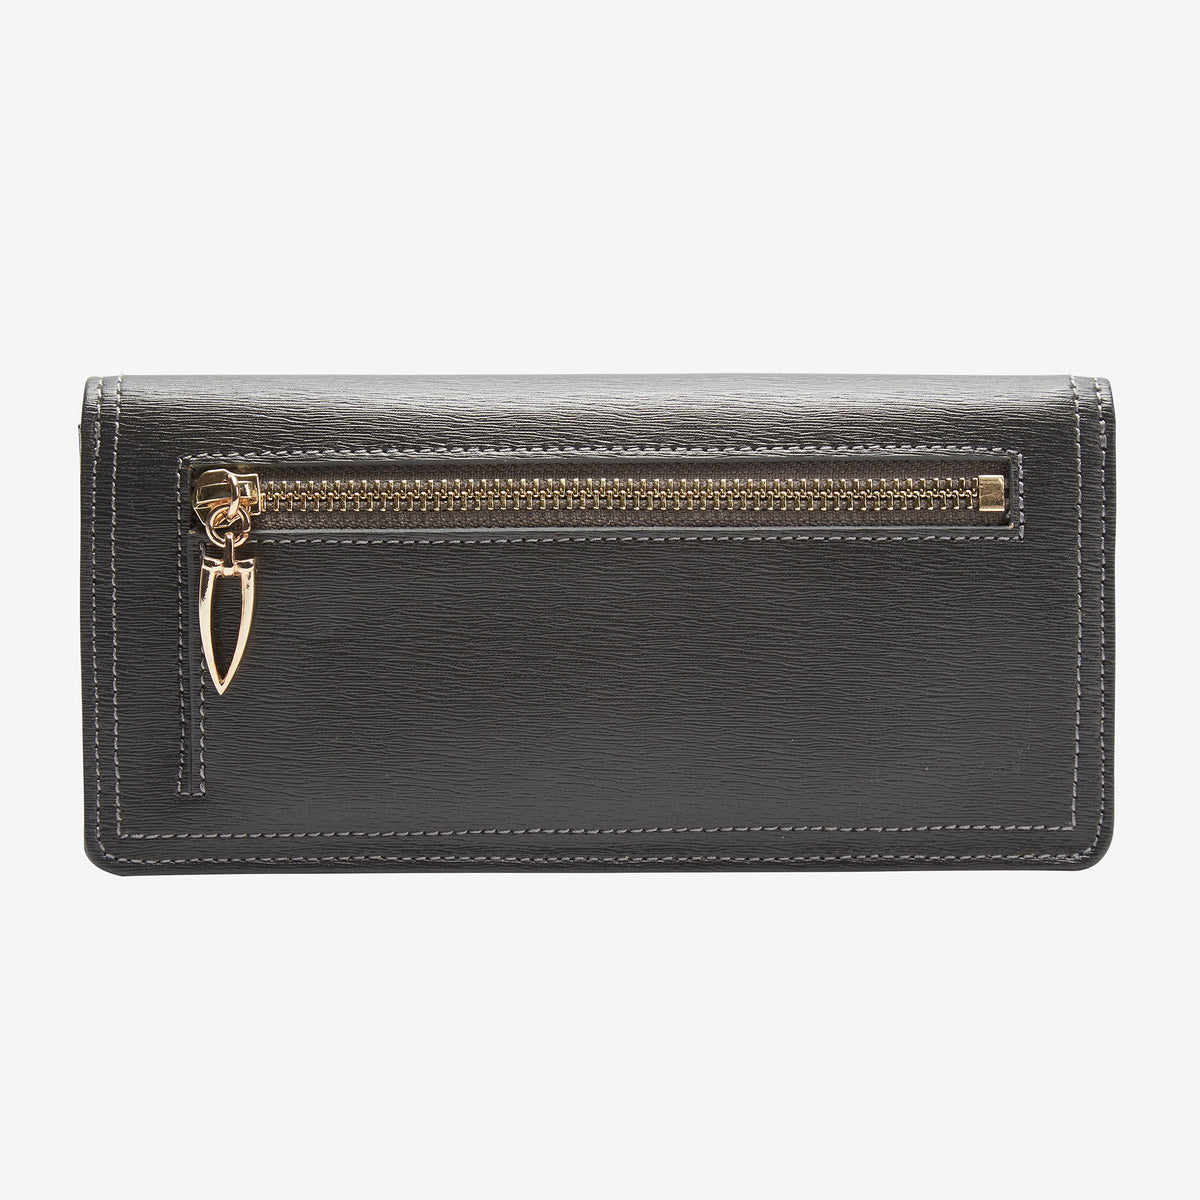 Madison | Gusseted Wallet-Tusk